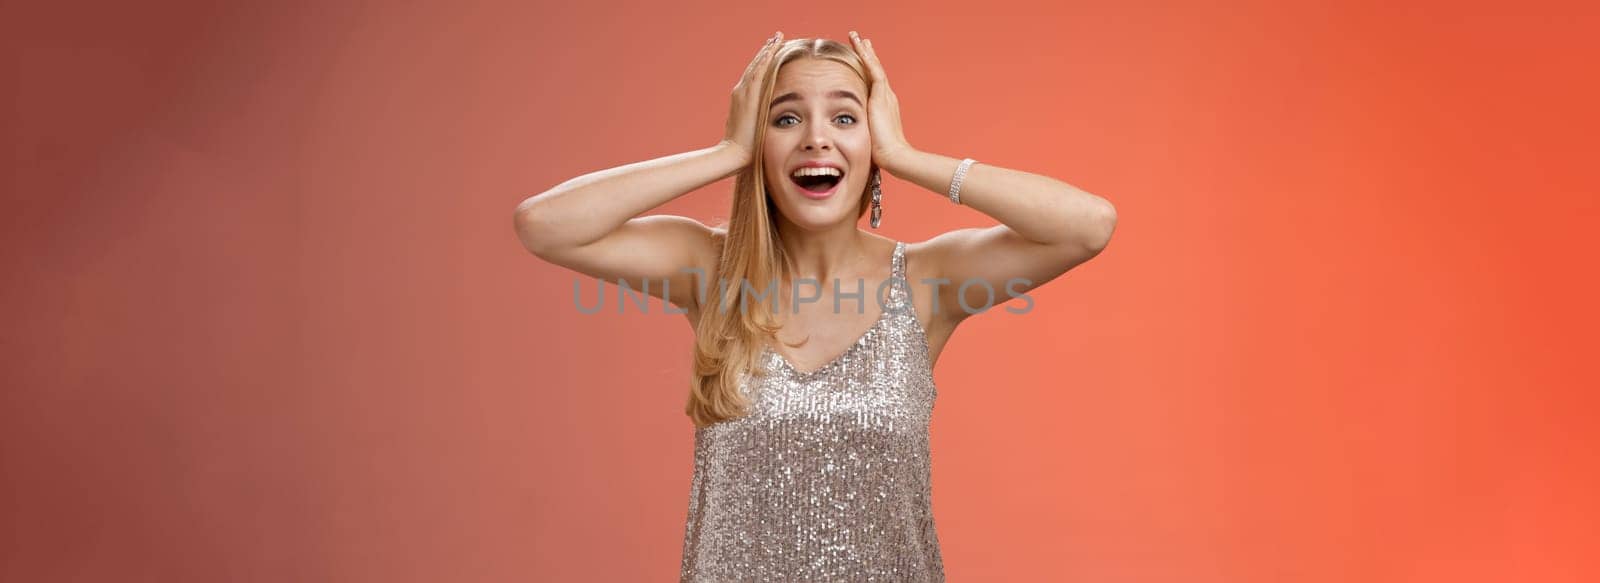 Amazed excited nervous young beautiful blond woman in silver stylish dress cannot believe own luck happiness hold hands head smiling screaming astonished positive awesome news, triumphing.